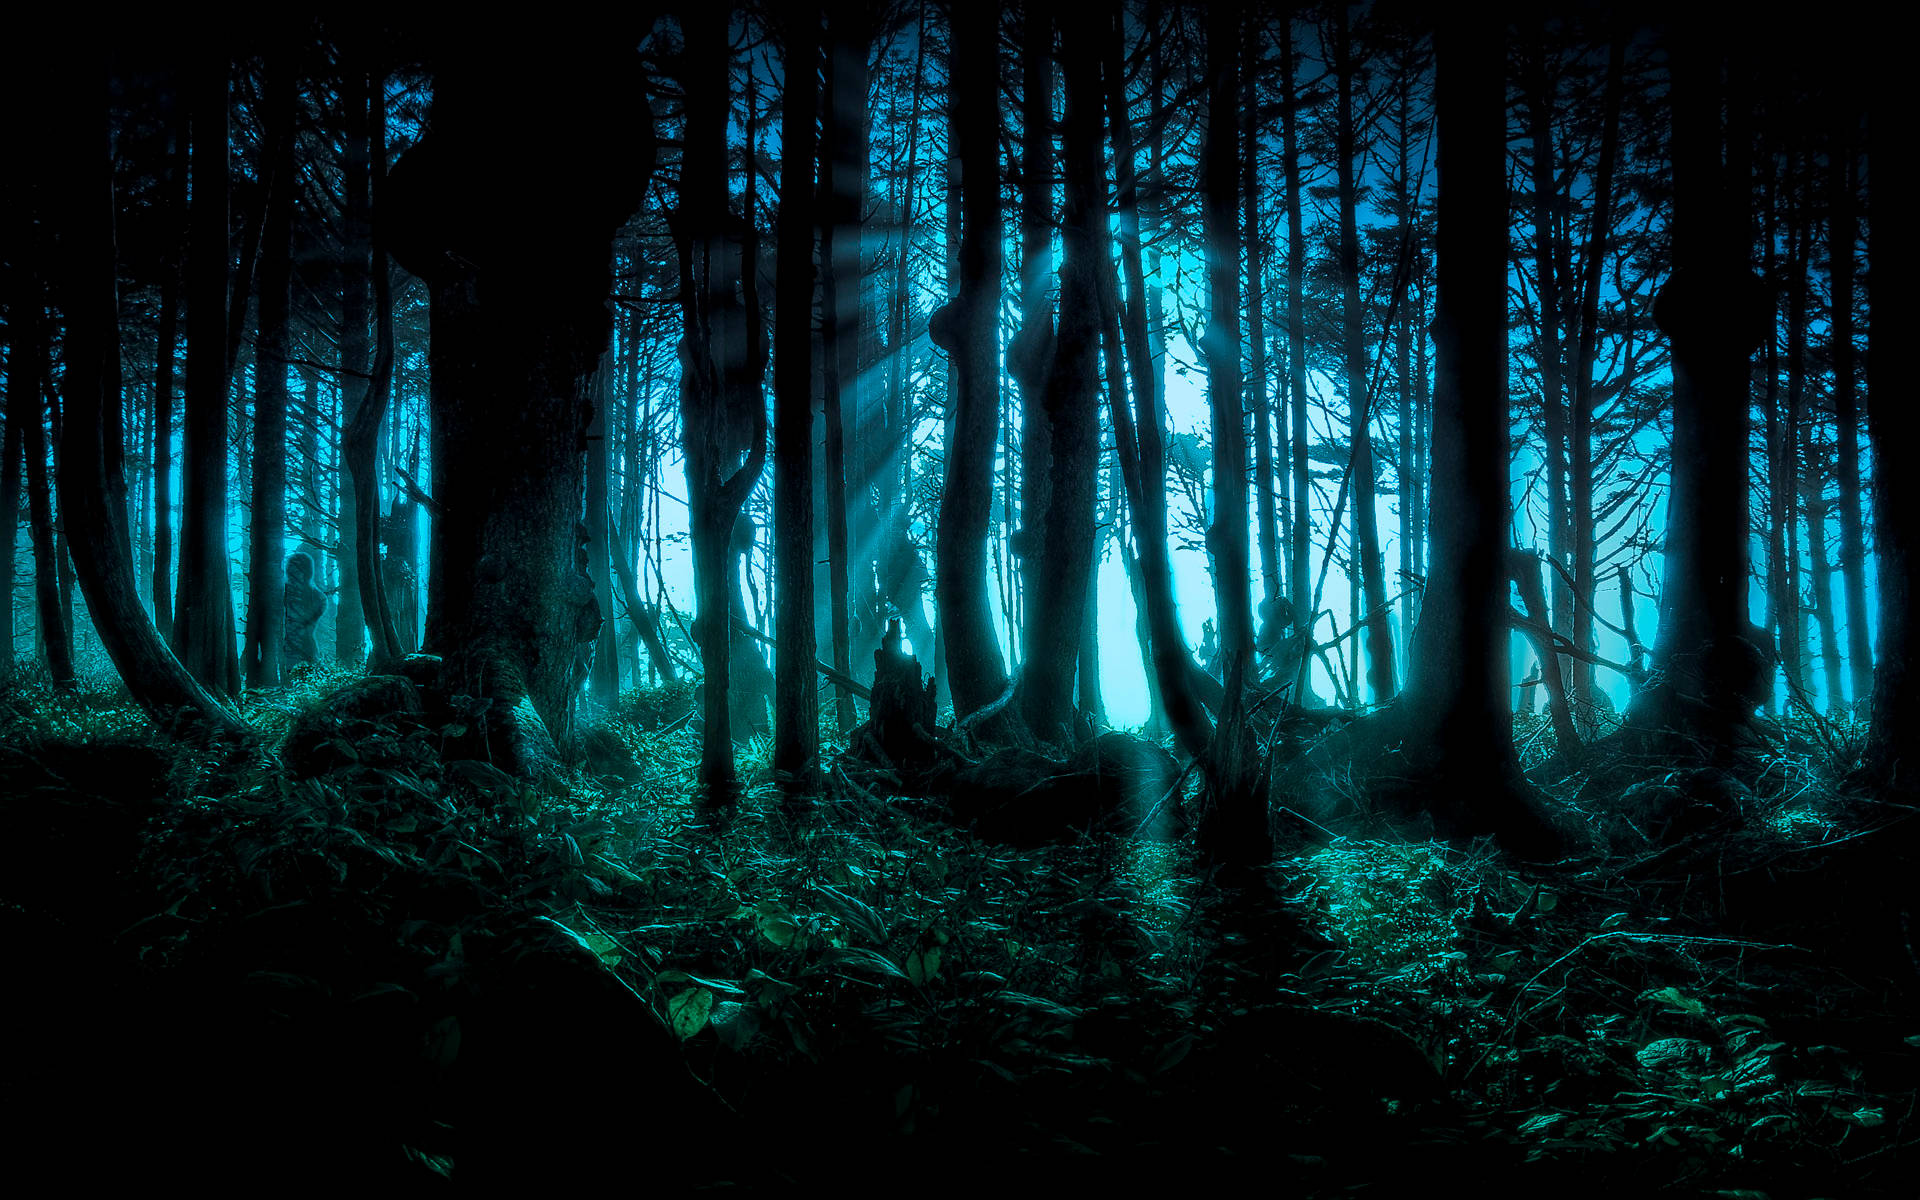 Dark scary forest image wallpaper.